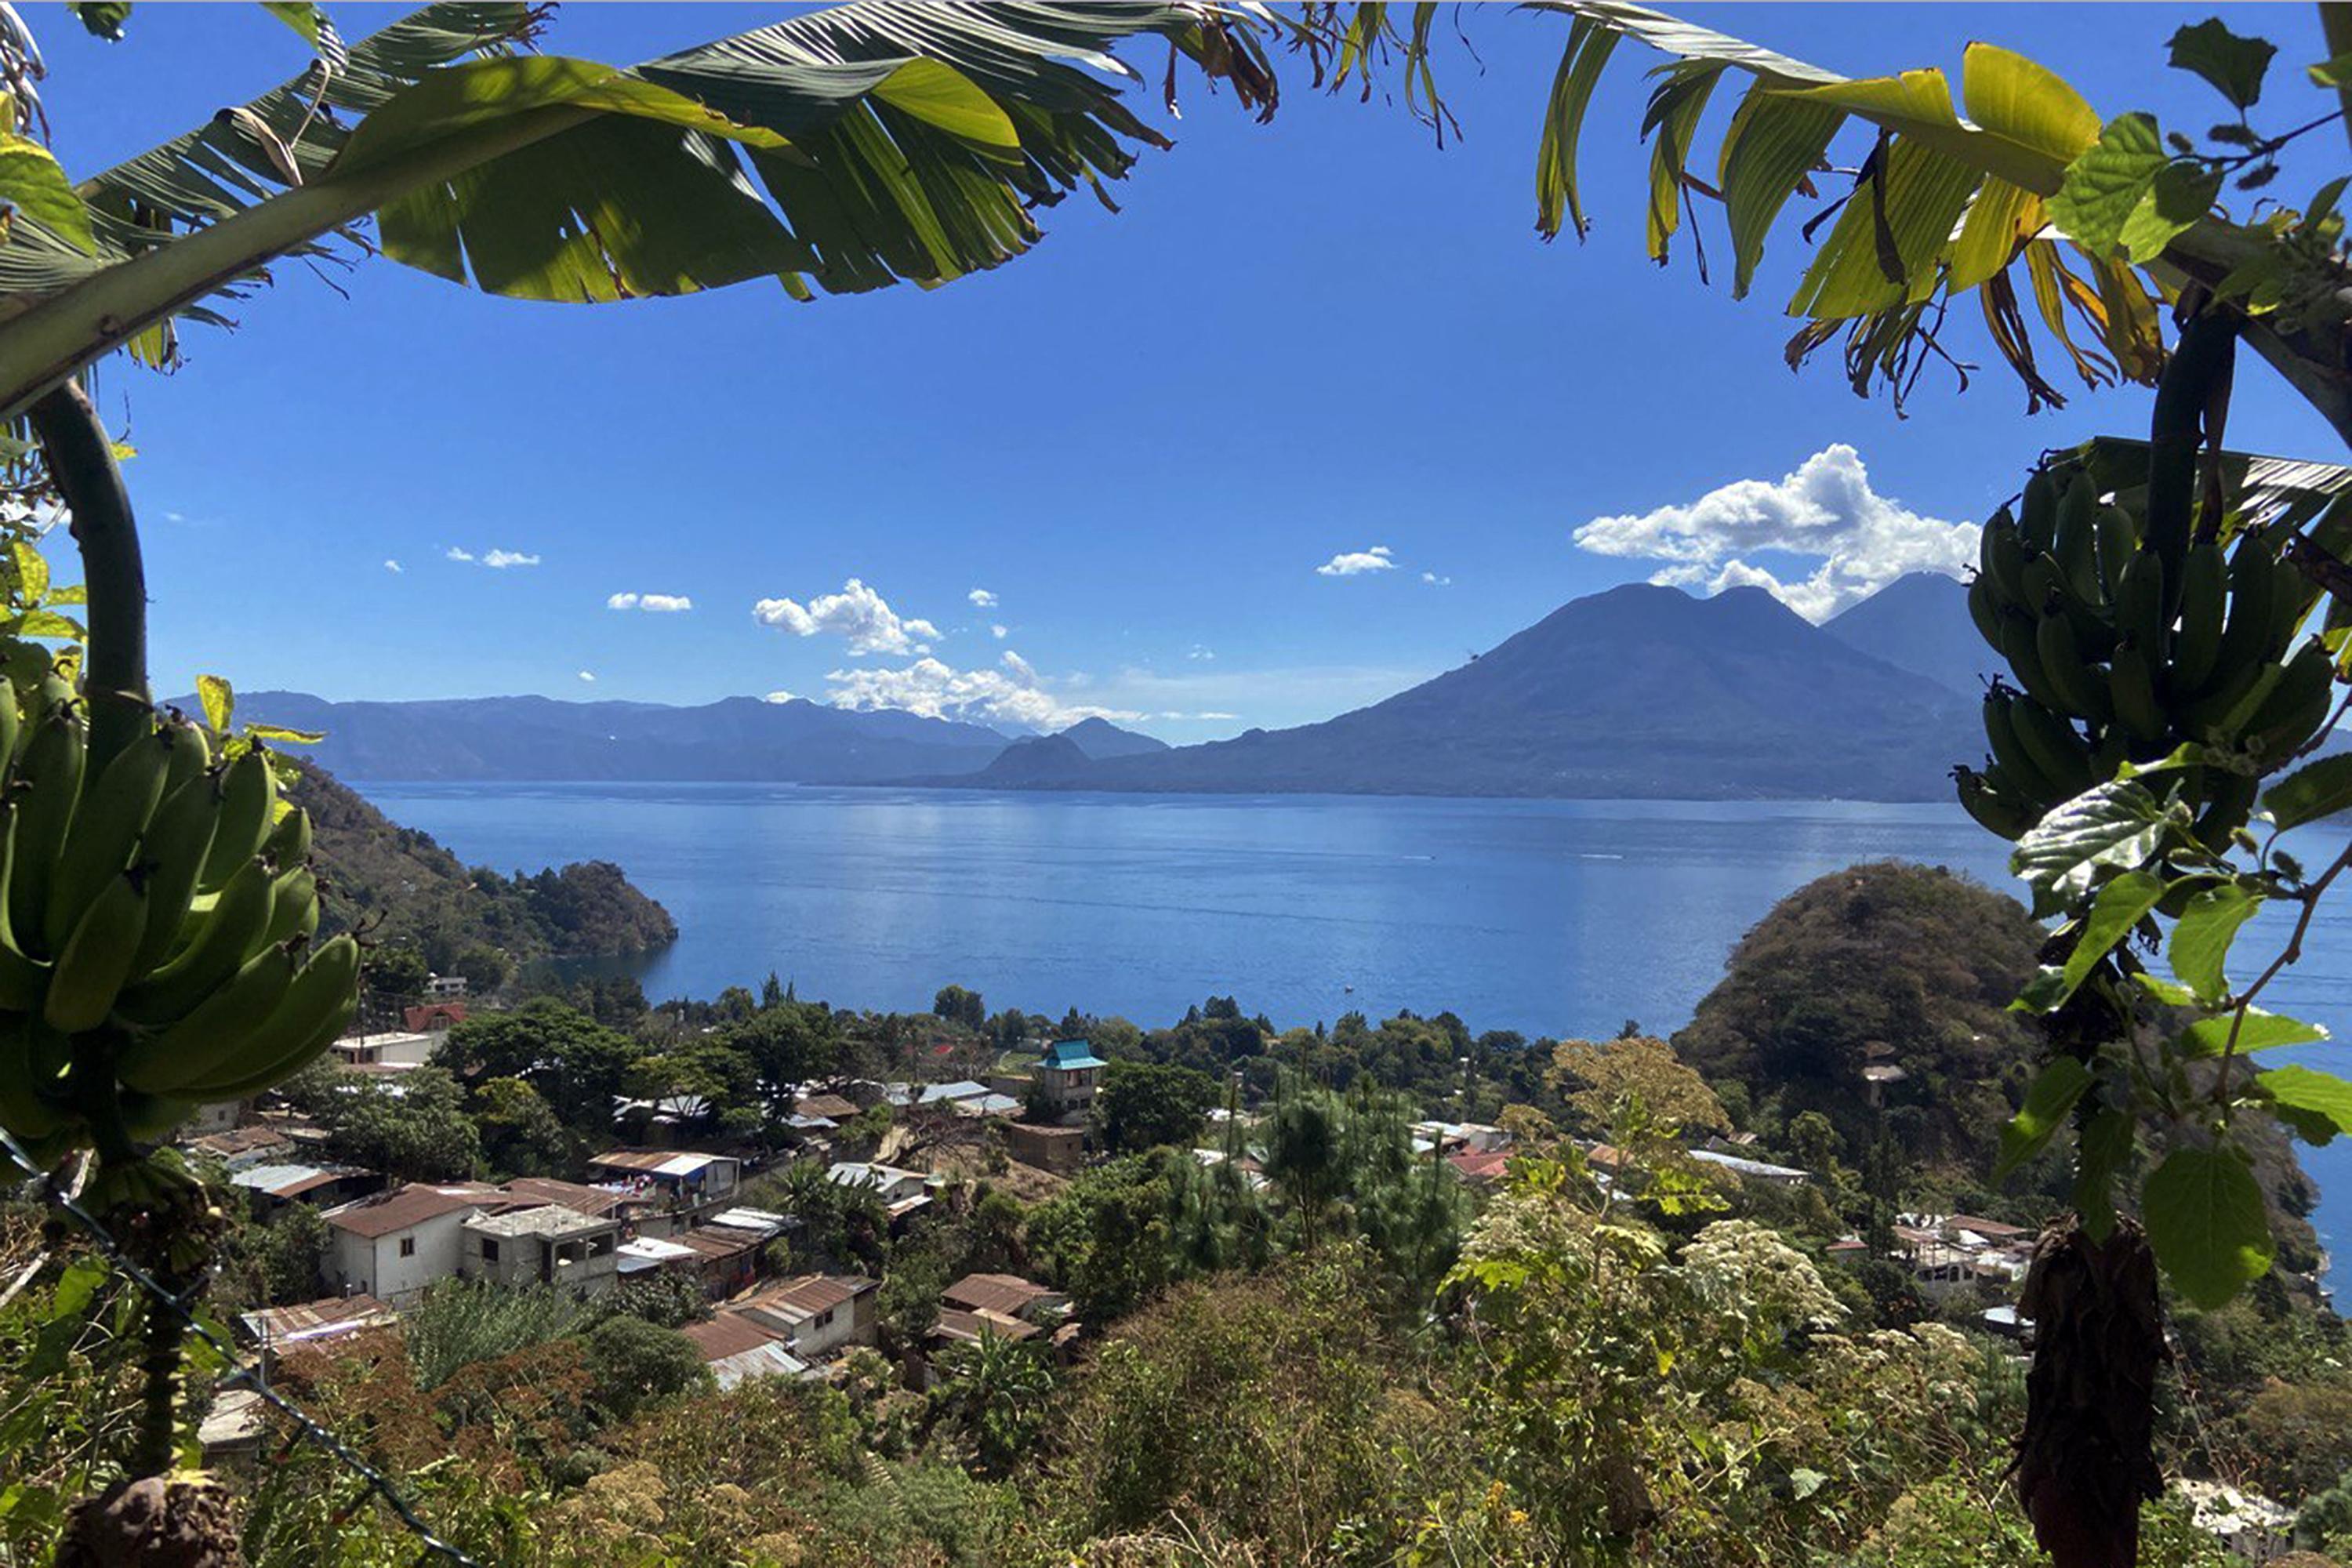 View of Lake Atitlán from Barrio 2 in San Marcos La Laguna. Kaqchikel residents call the spot of this photo Tz'un Ucuy, or 